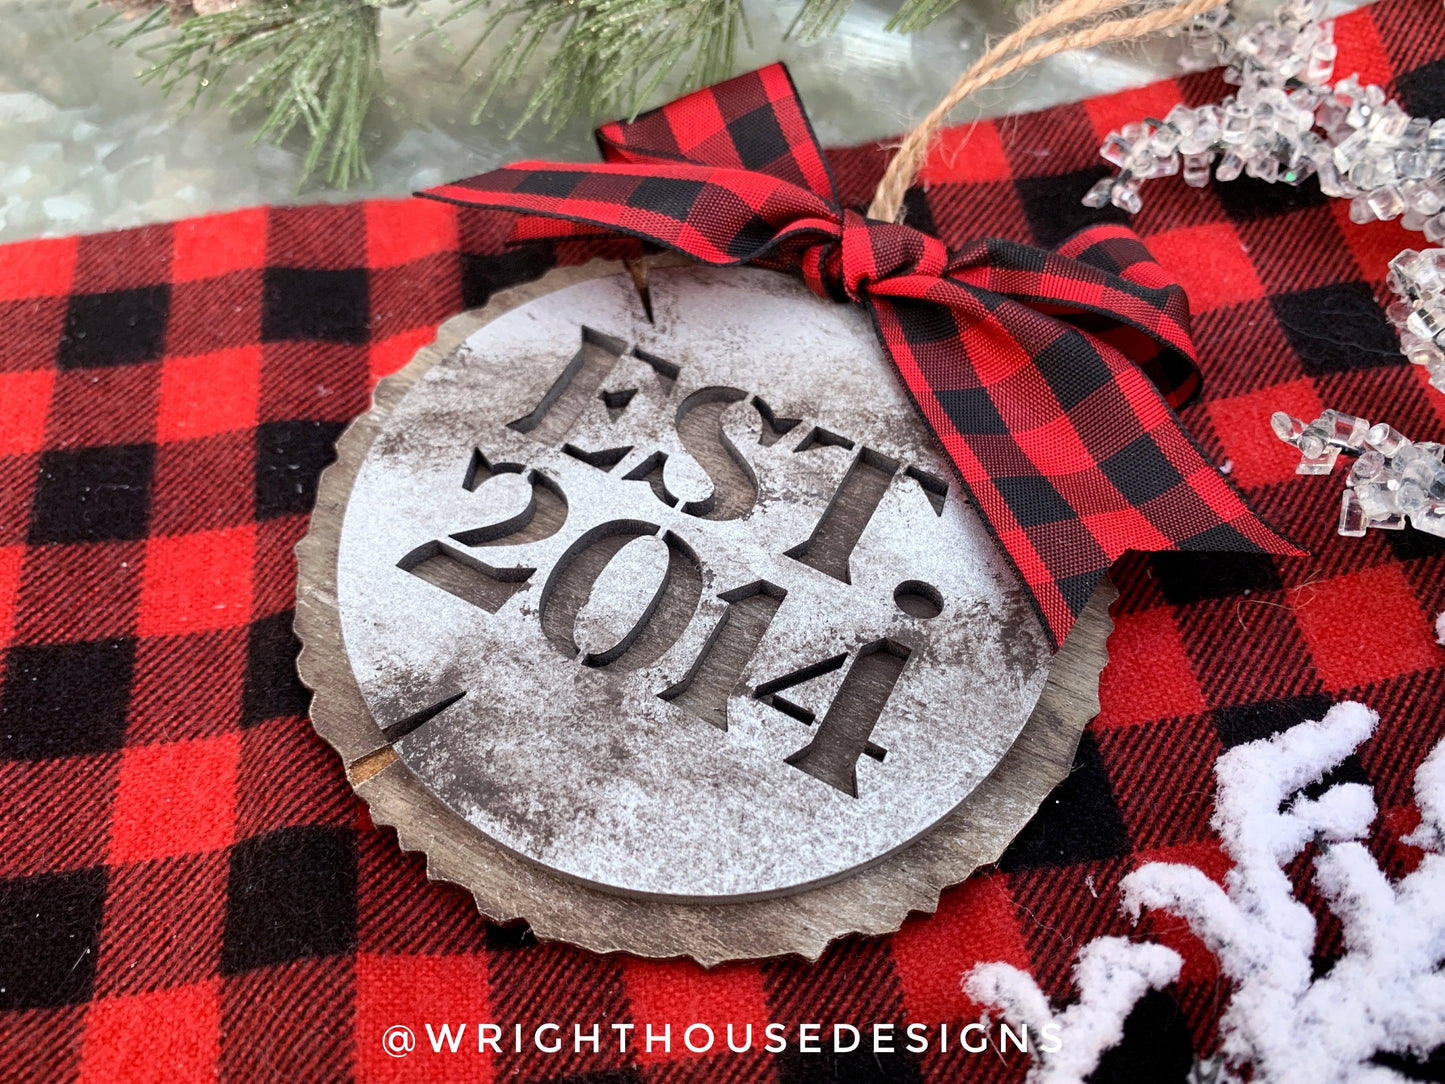 Rustic Galvanized Cookie Tree Ornament - Stencil Established Wood Slice - Ski Lodge Tree Ornament - Year Ornament - Holiday Gift for Couples